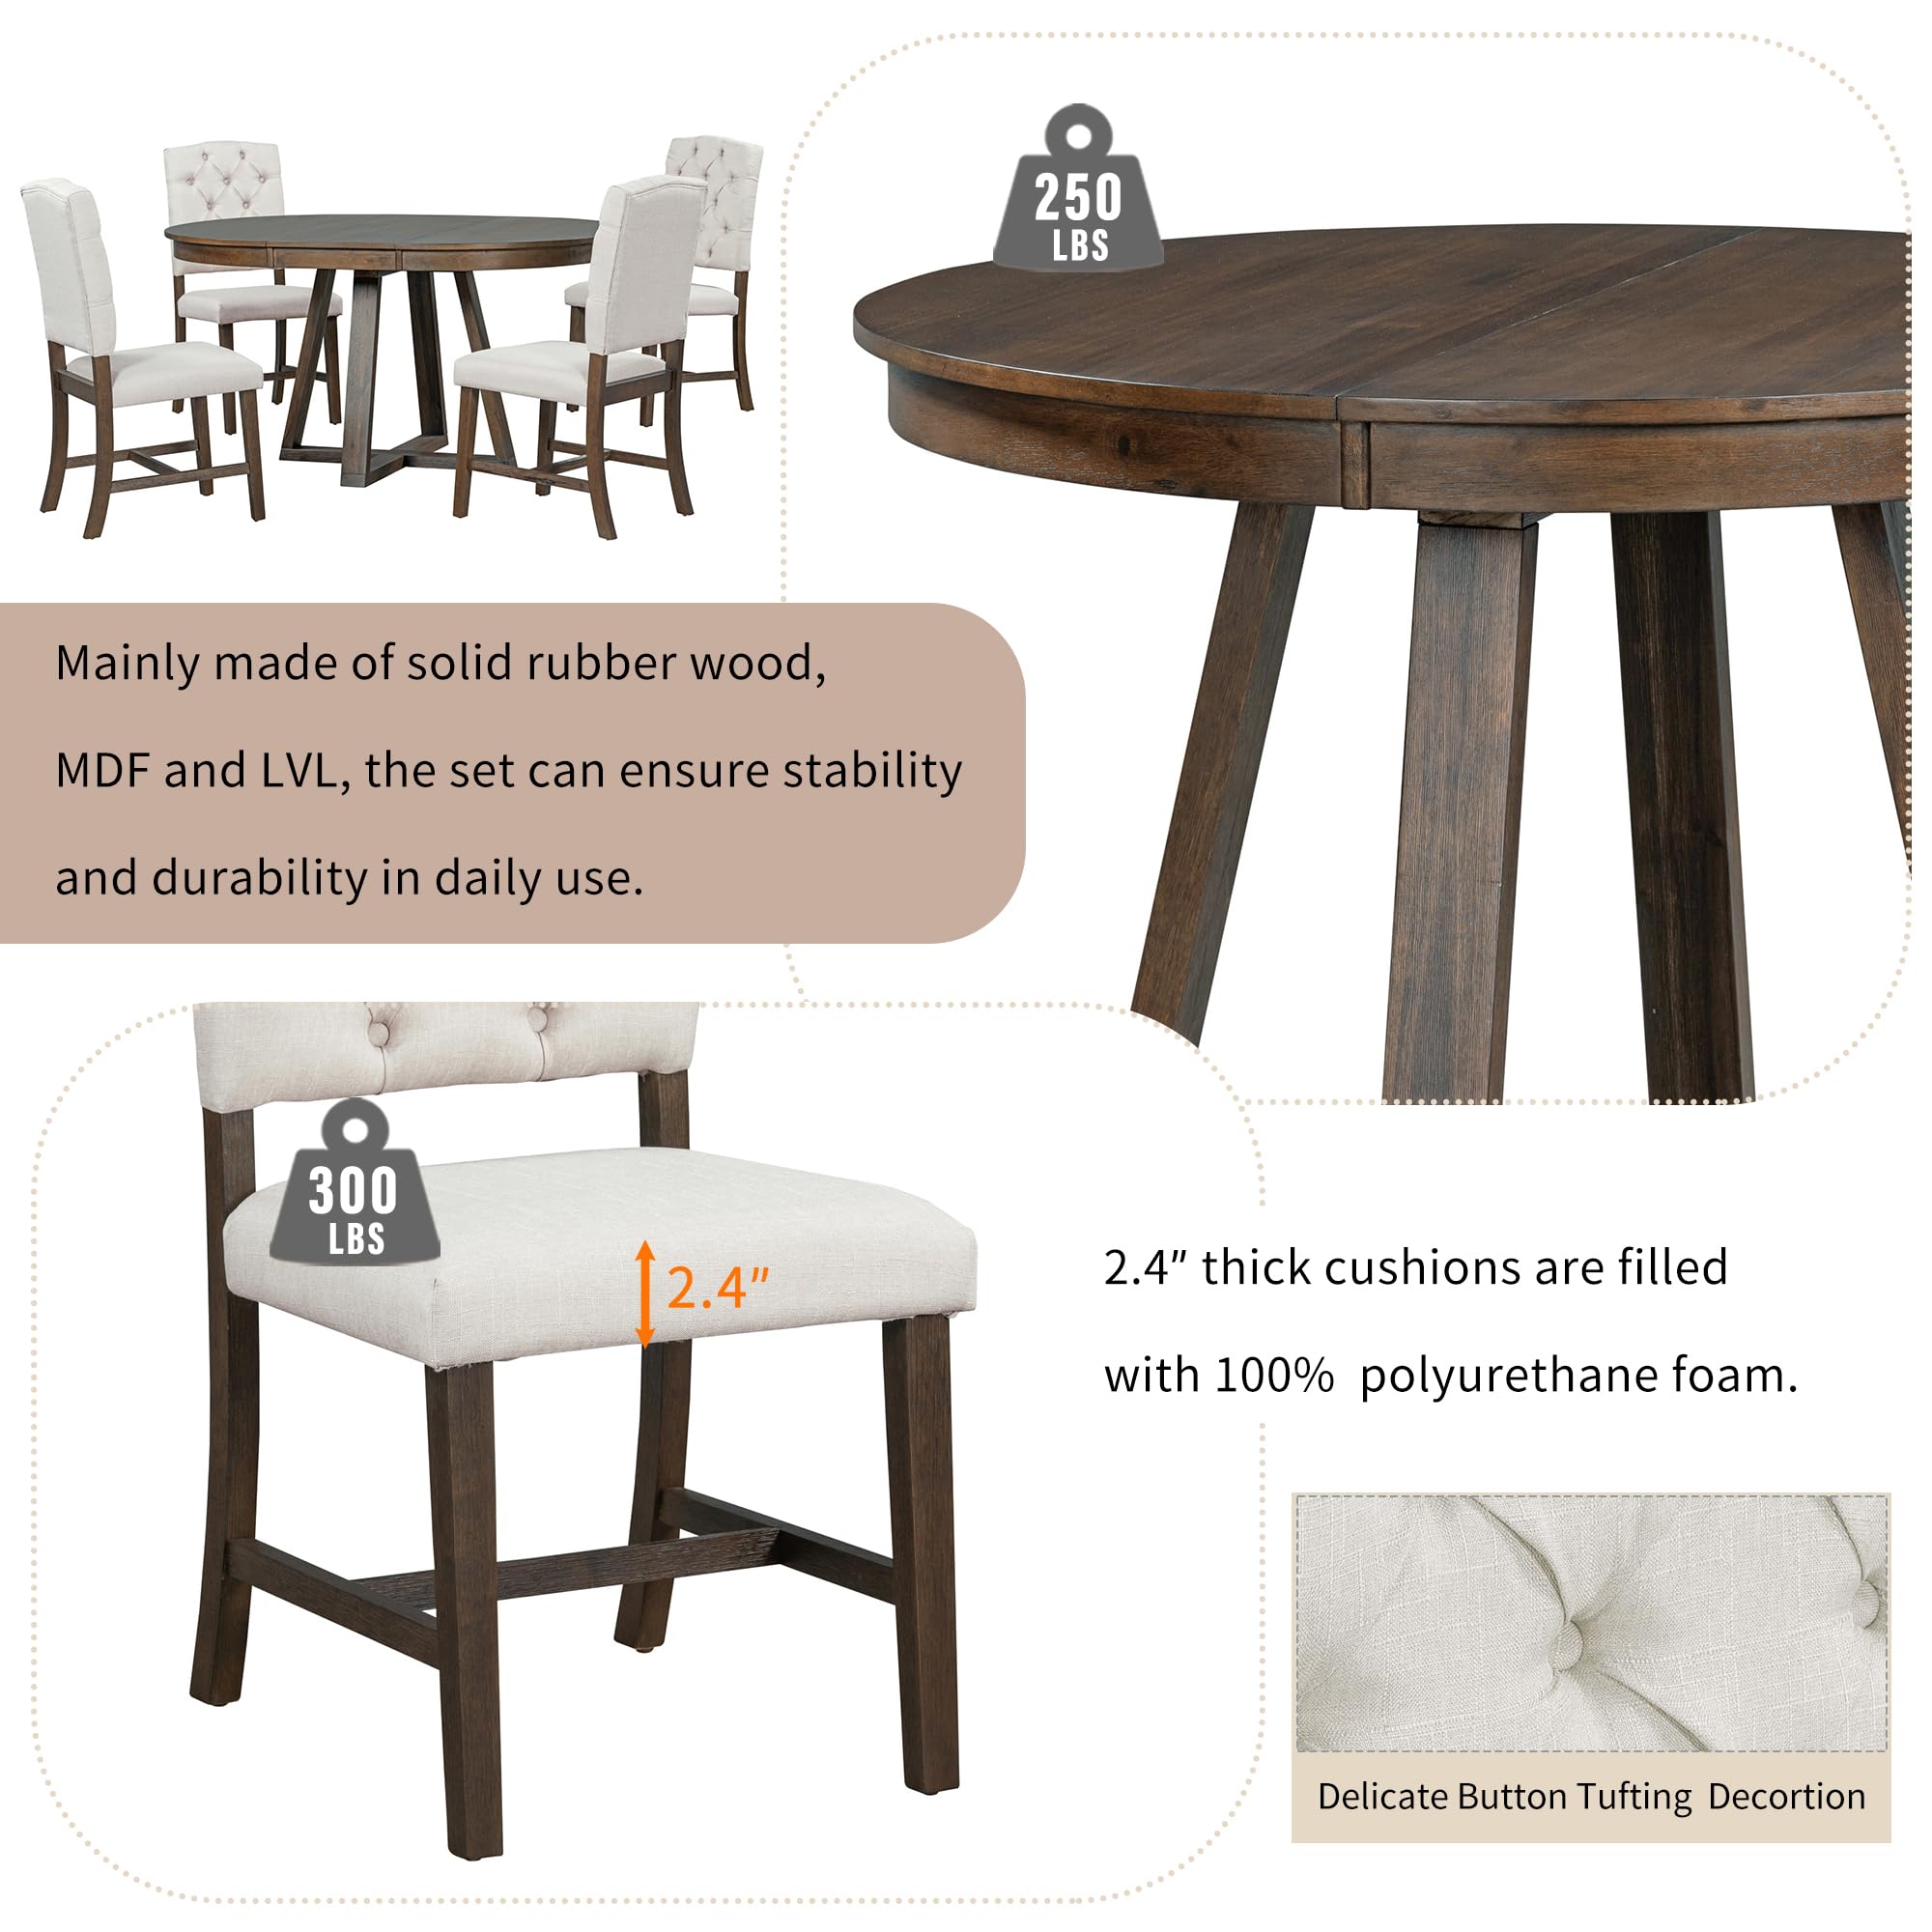 Merax, Walnut 5-Piece Retro Functional Set,Round Wood Table with a 16" W Leaf and 4 Upholstered Chairs for Dining Room